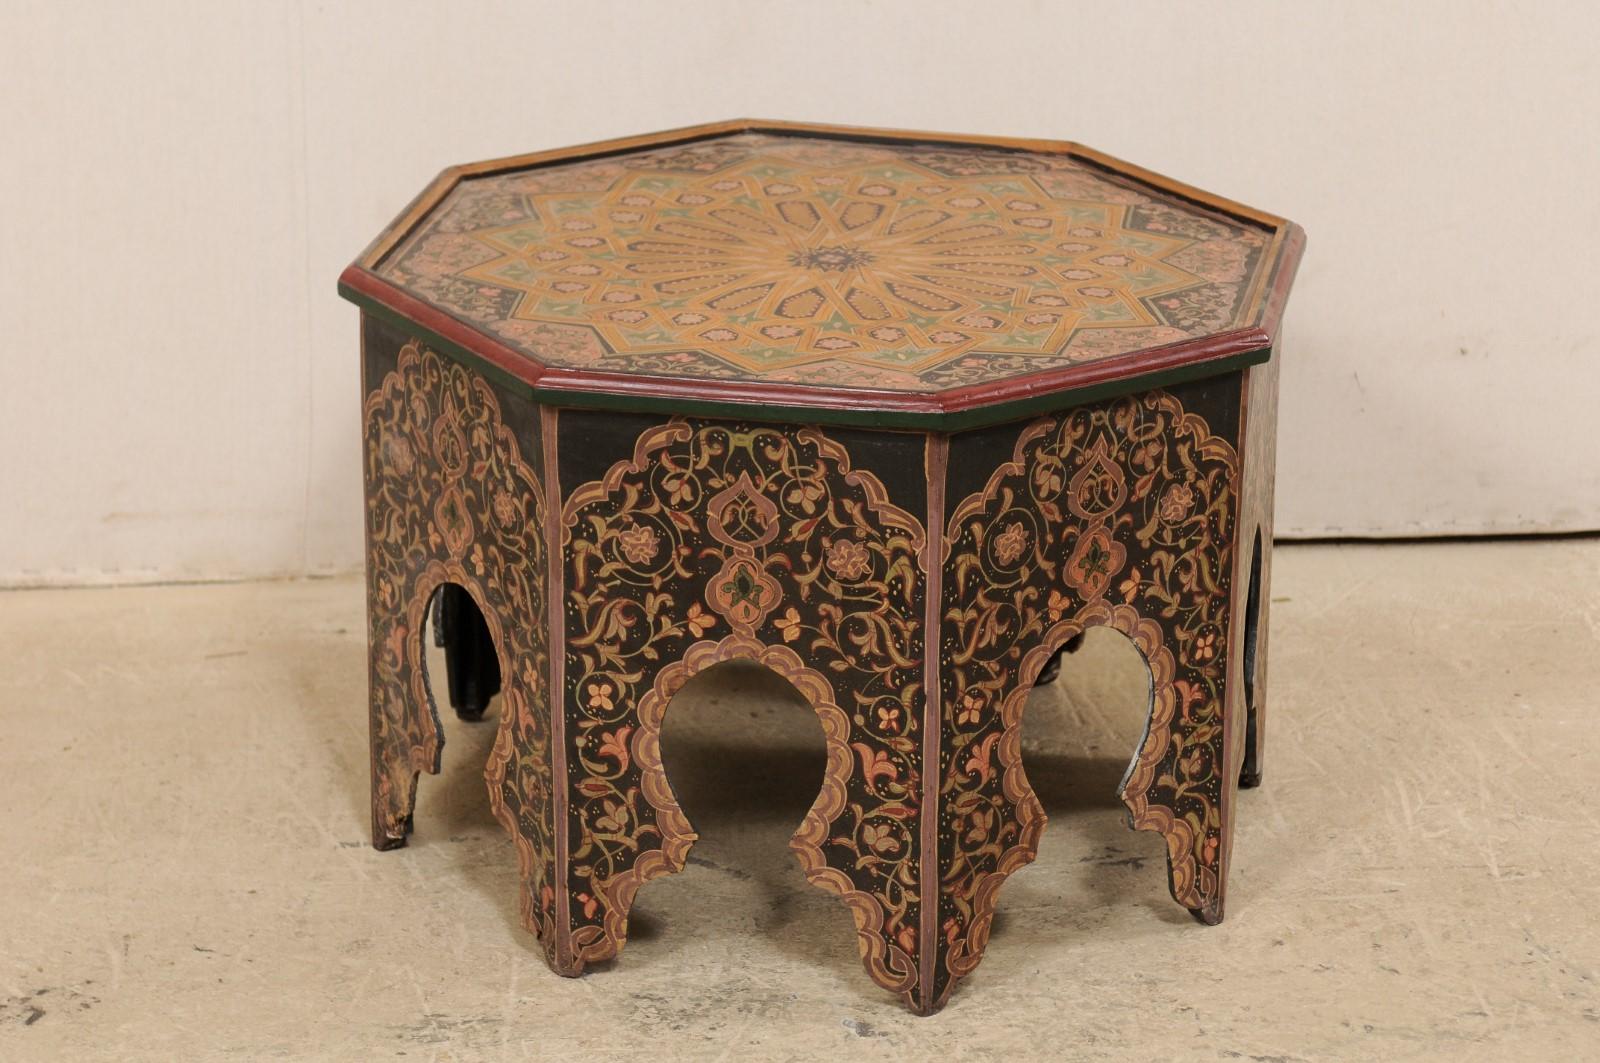 Moroccan Coffee or Tea Table Adorn with Intricate Floral and Geometric Paintings 1